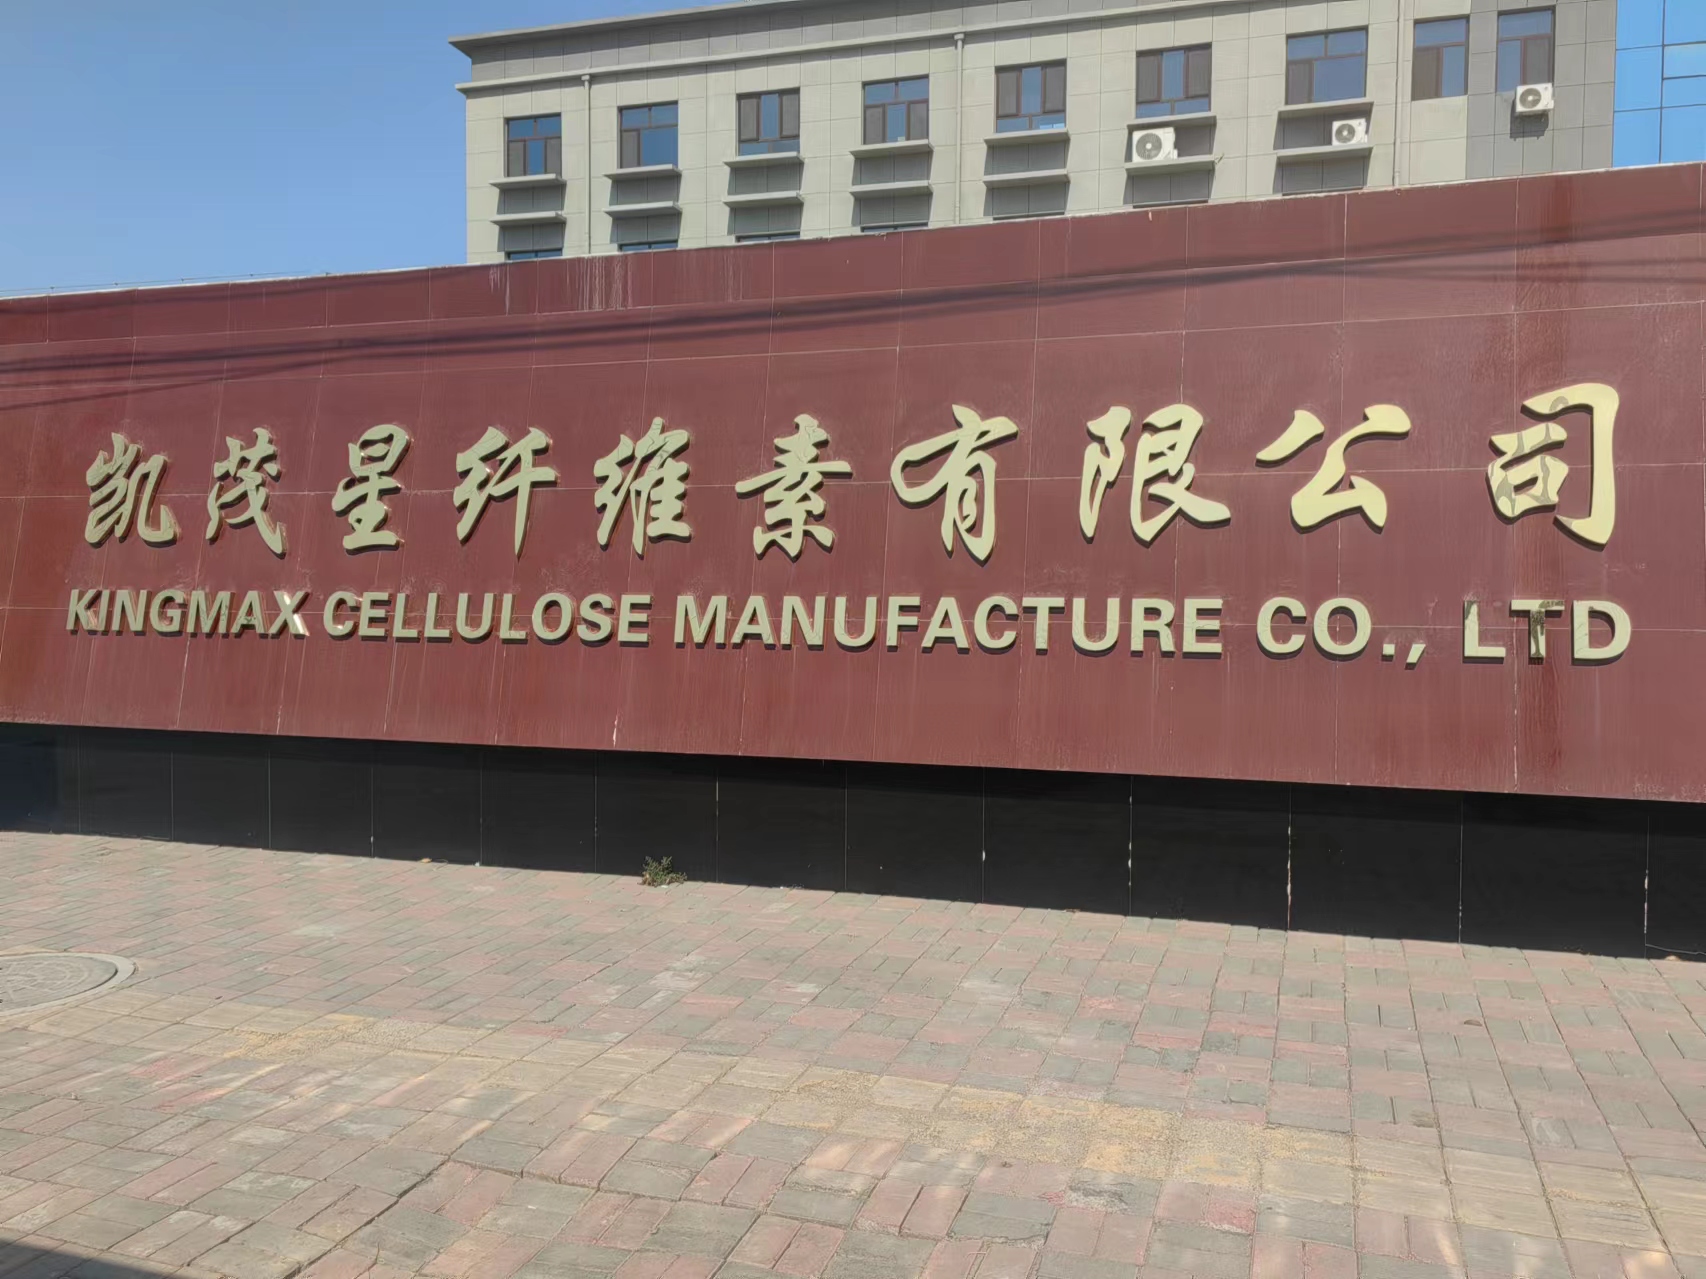 Thank you again for your support and love! Kingmax Cellulose Co., Ltd. will, as always, work hard to create a better future with you!